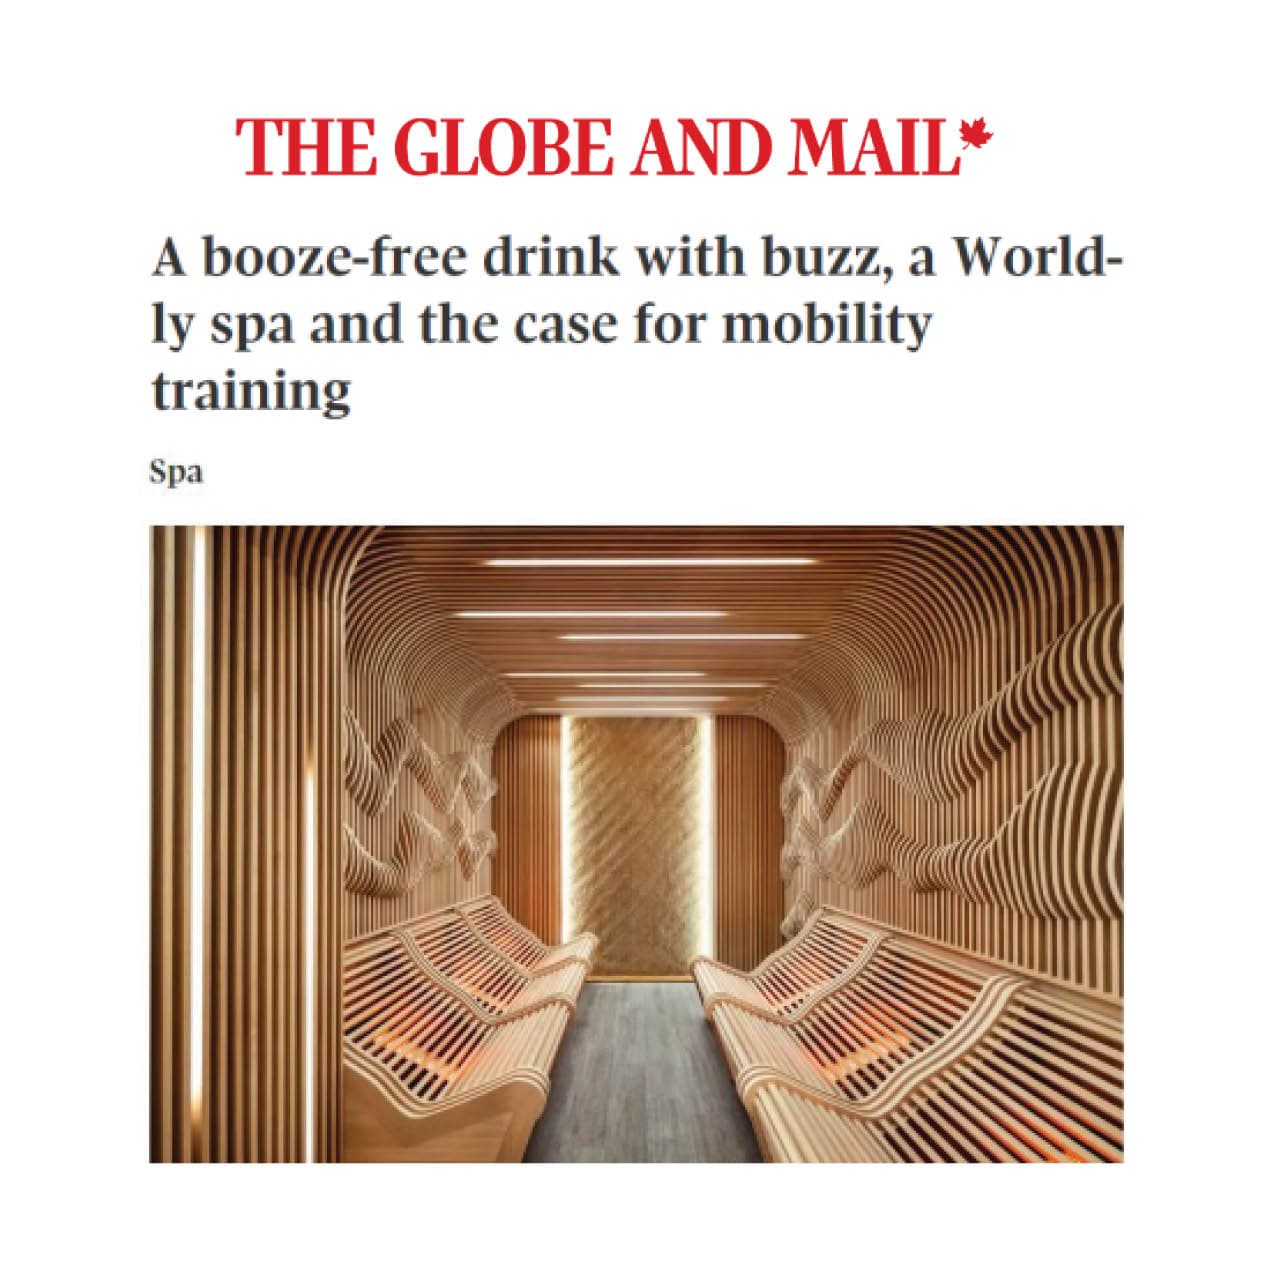 an excerpt from the globe and mail magazine featuring World Spa.